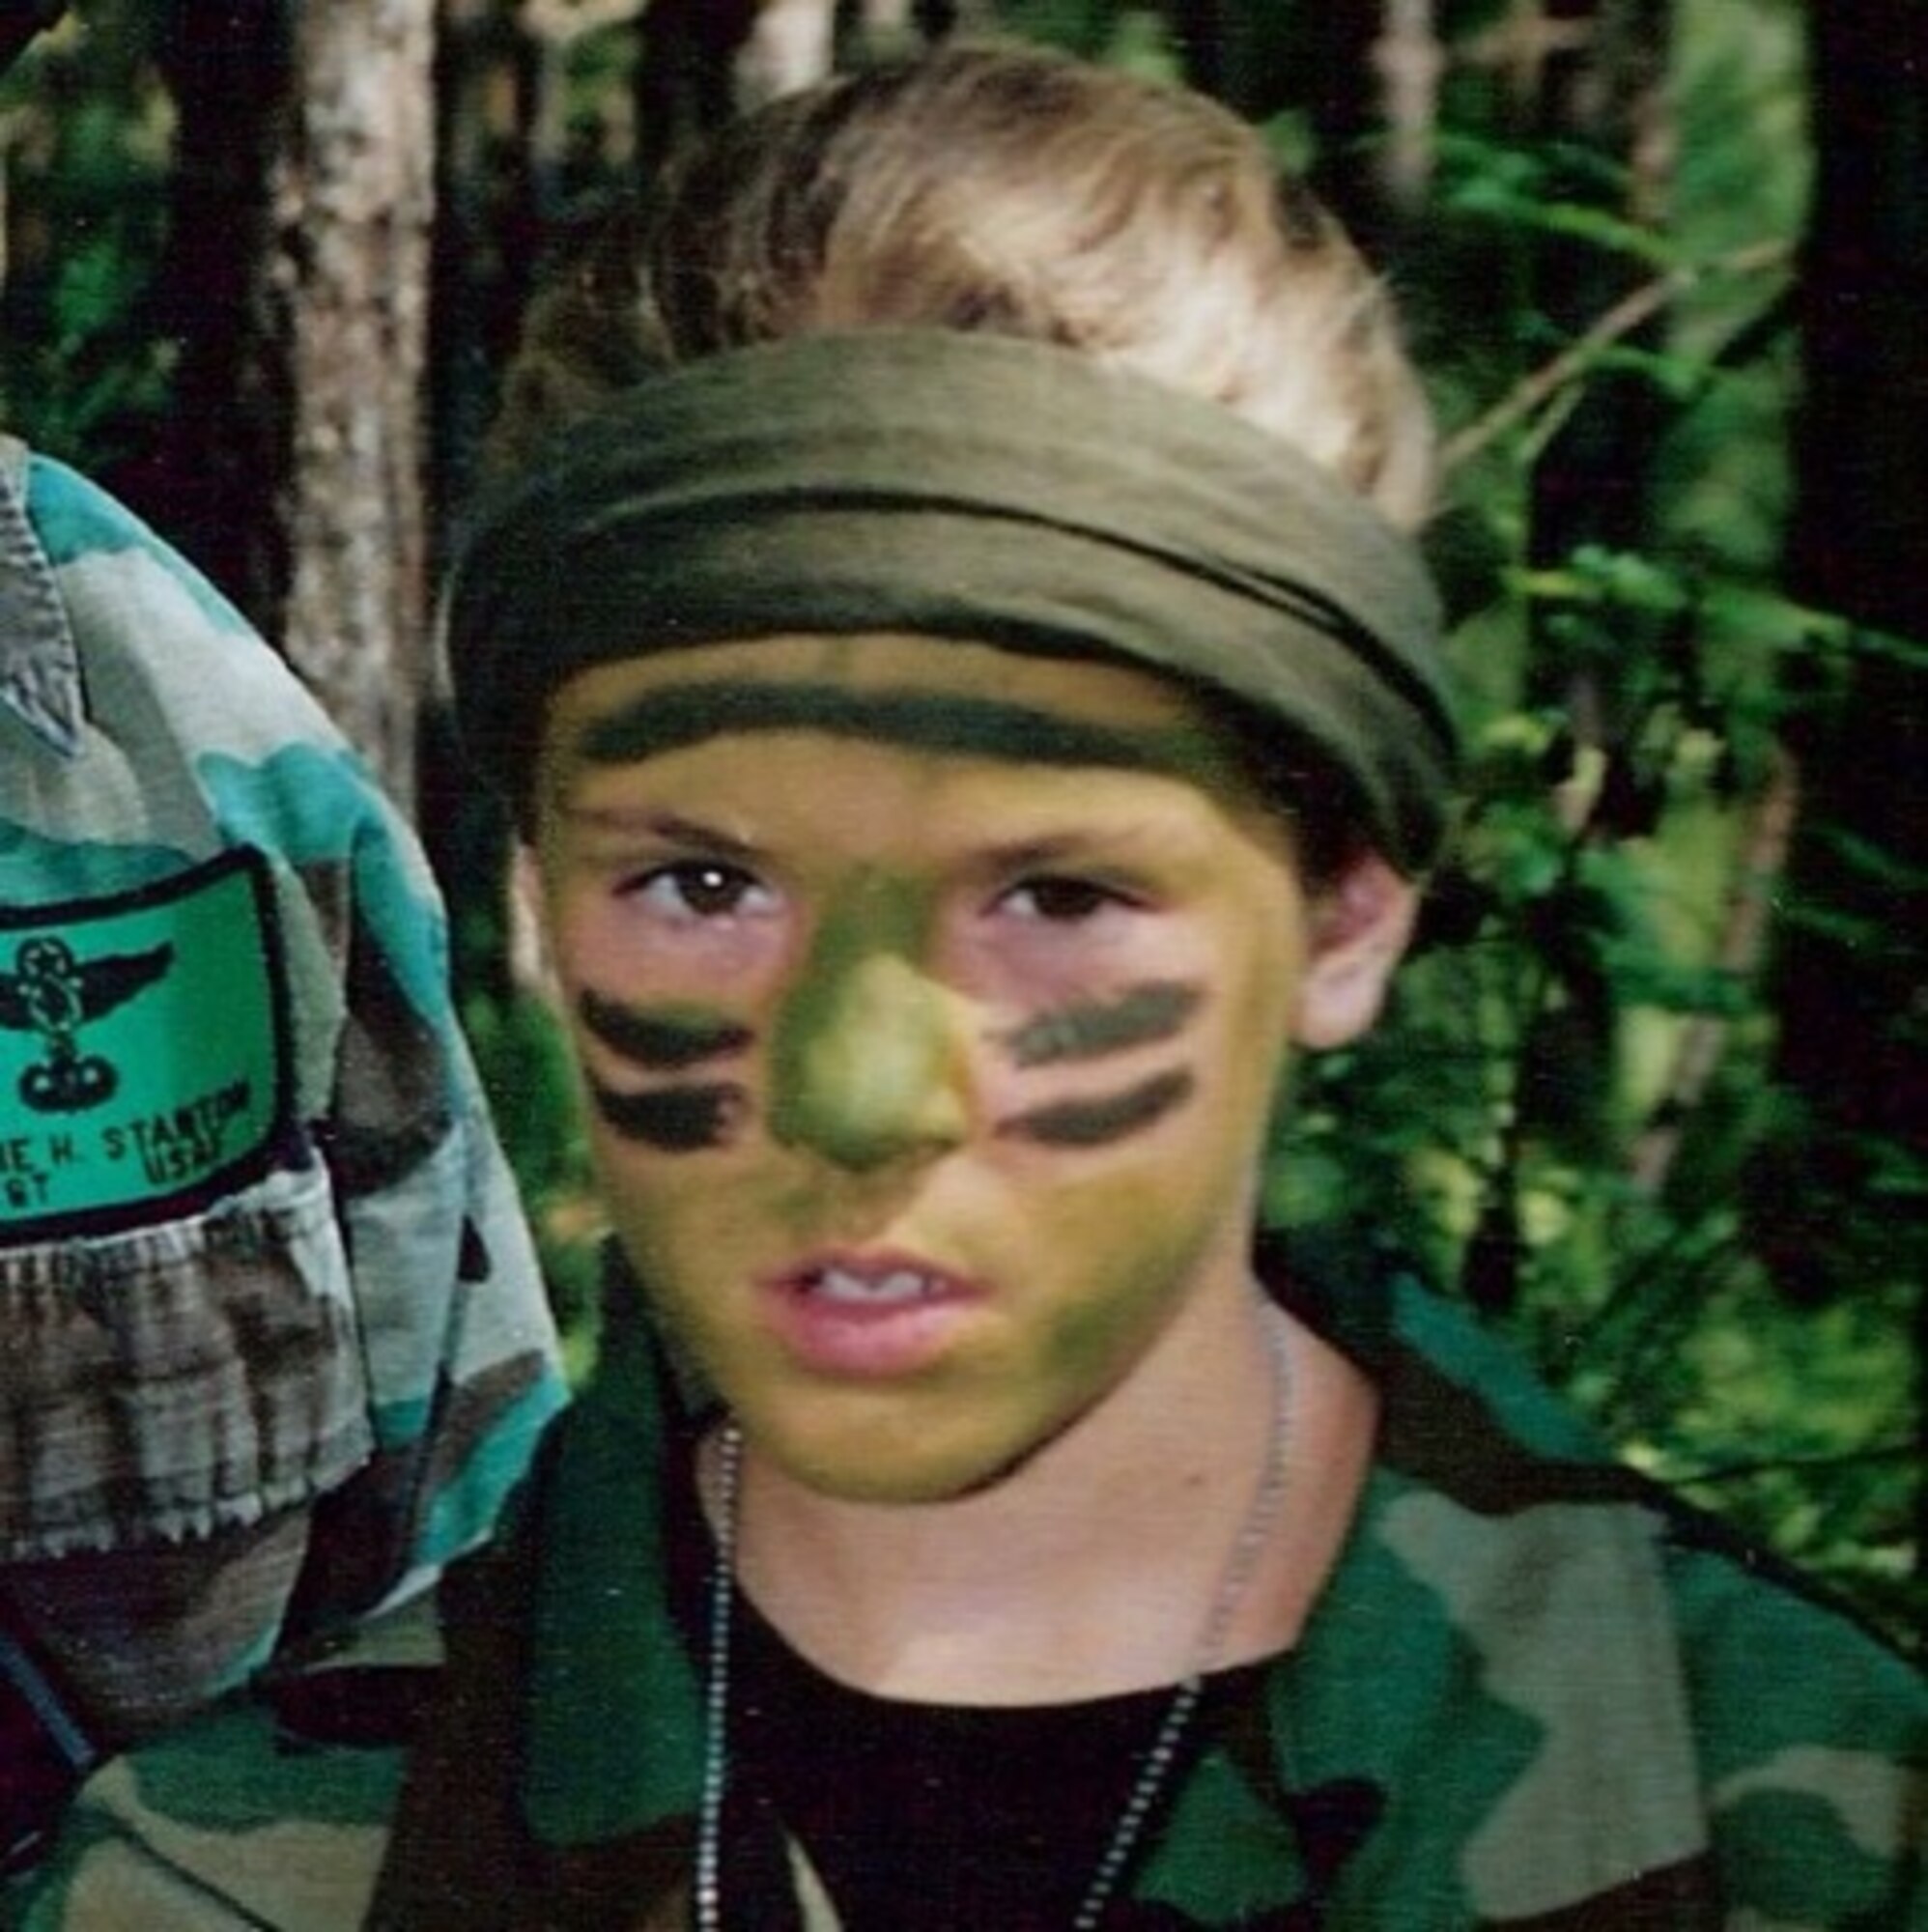 A young Bethany Bowater displays her early camouflage skills during a trip with her father. Bowater would go on to fulfill her father's dream of joining the Survival Evasion Resistance Escape school to as a SERE Specialist. (courtesy photo)